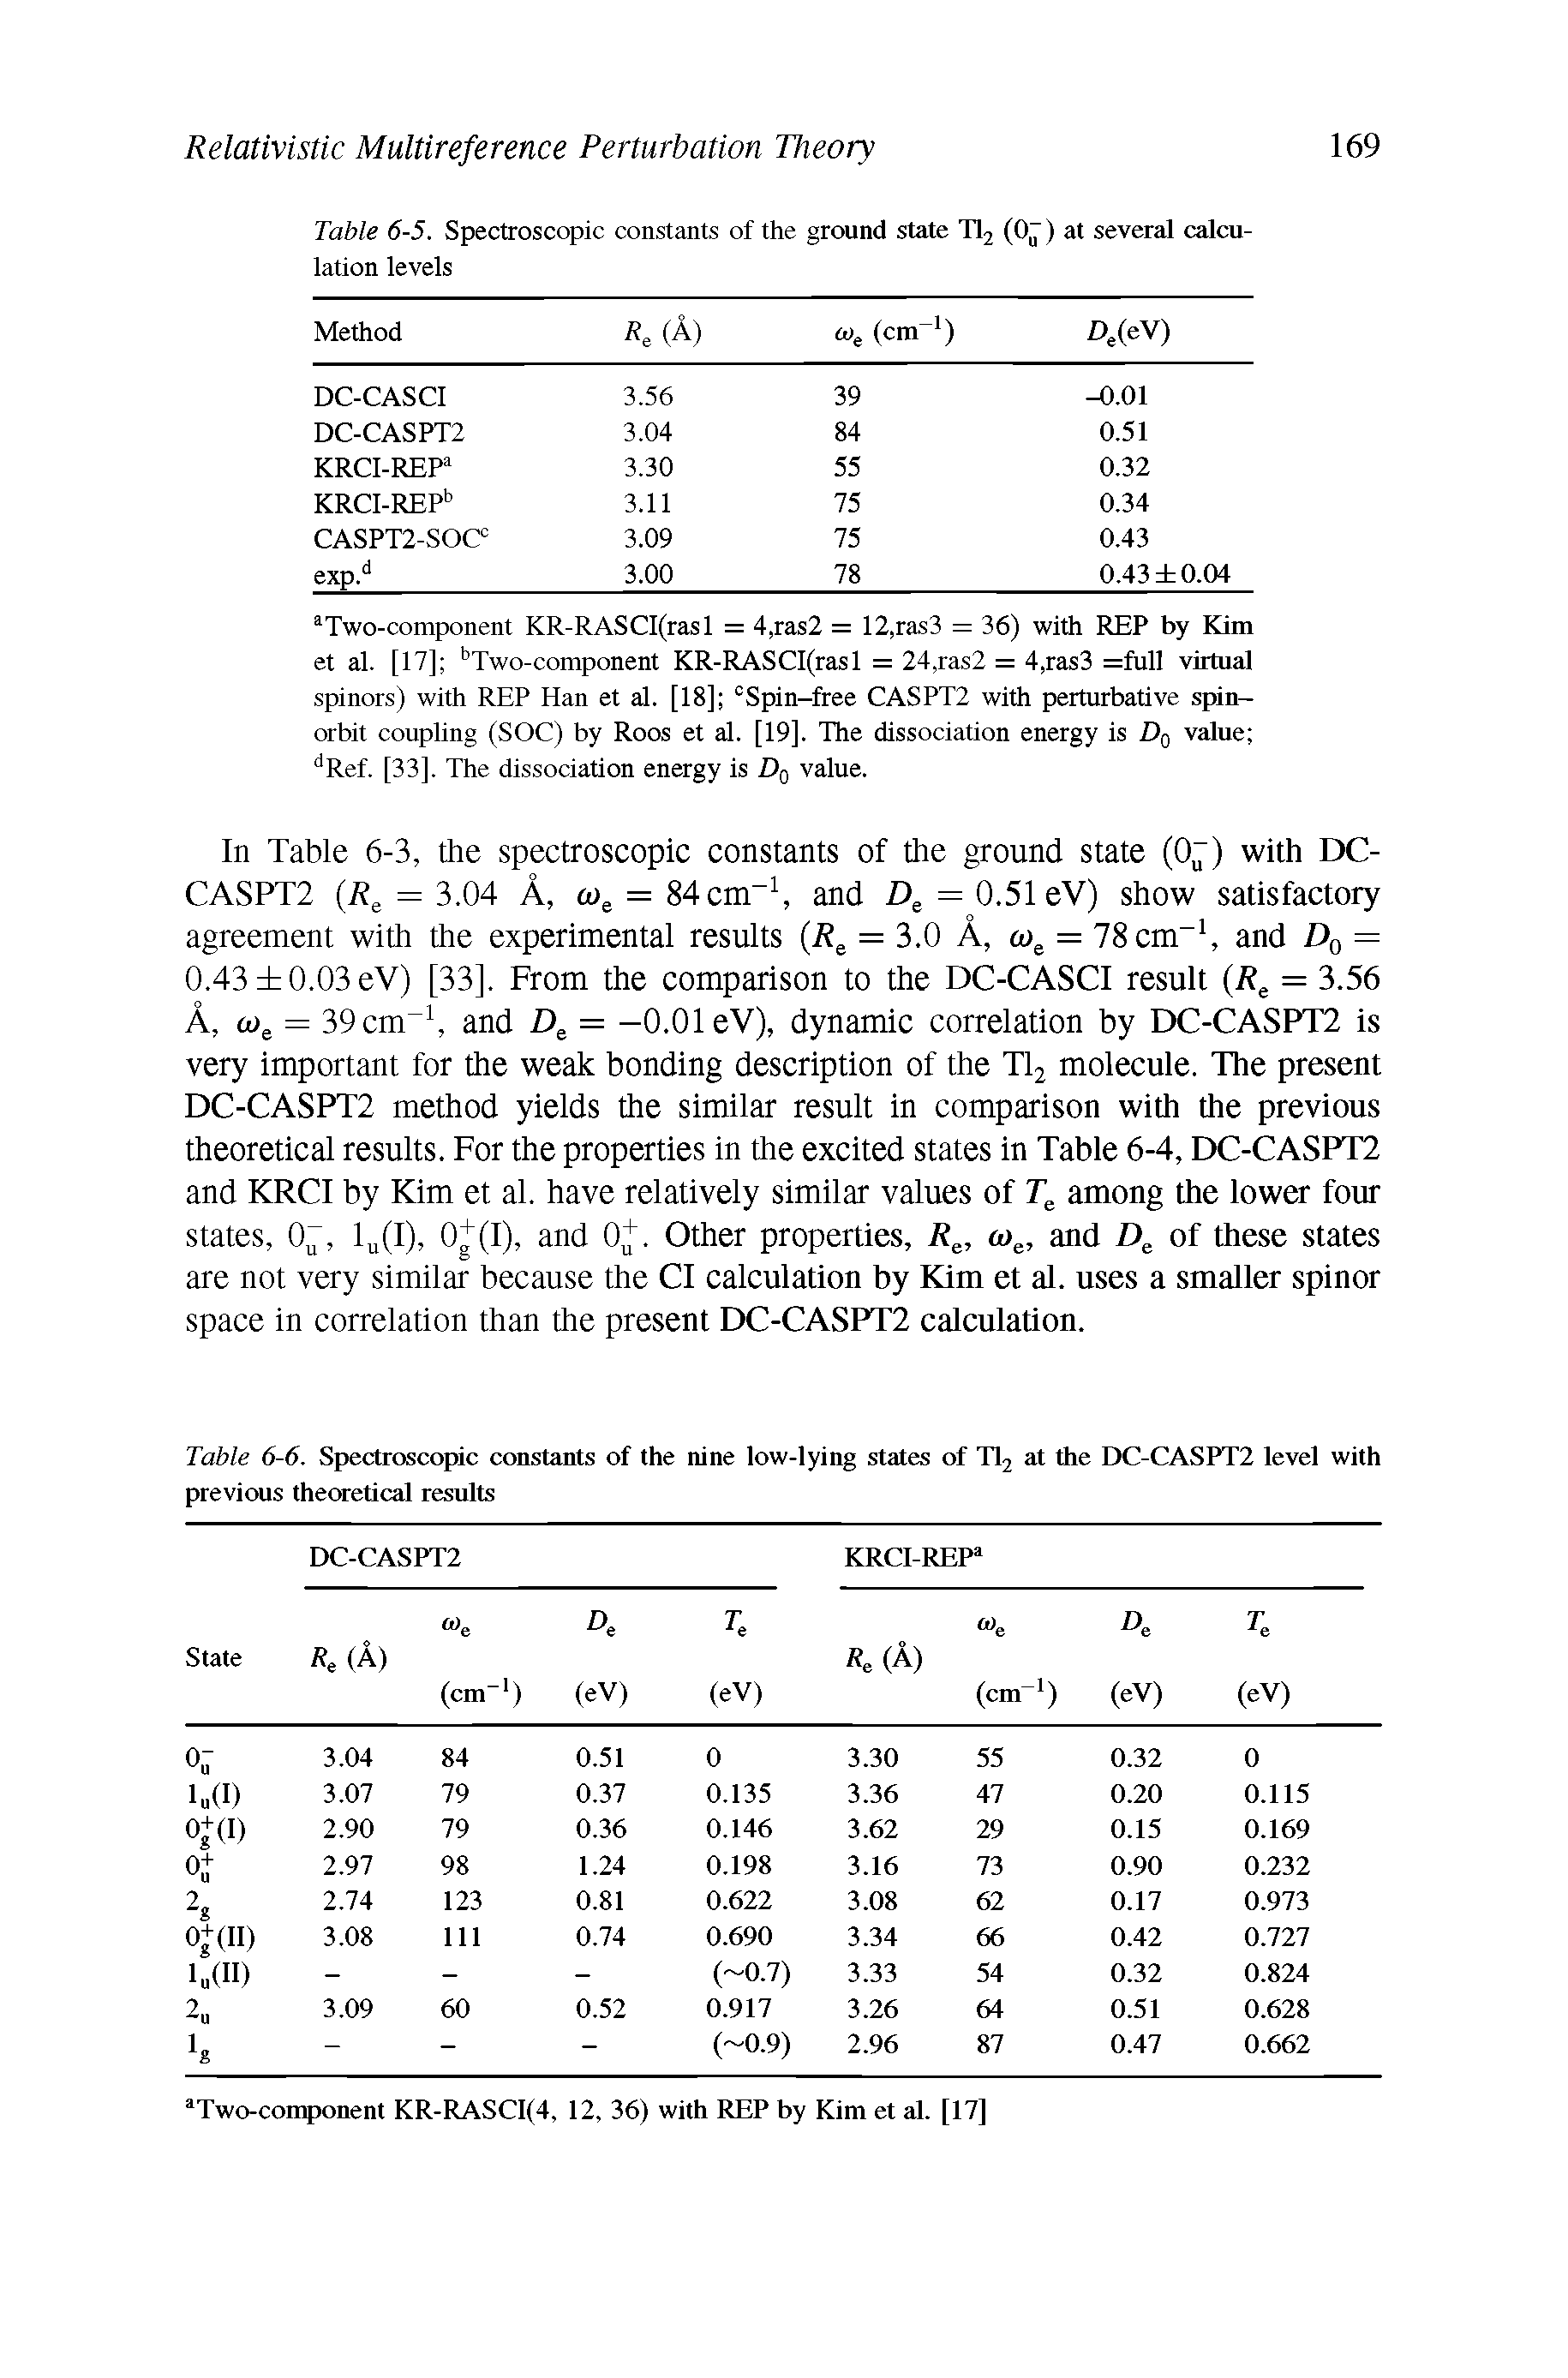 Table 6-6. Spectroscopic constants of the nine low-lying states of Tl2 at the DC-CASPT2 level with previous theoretical results...